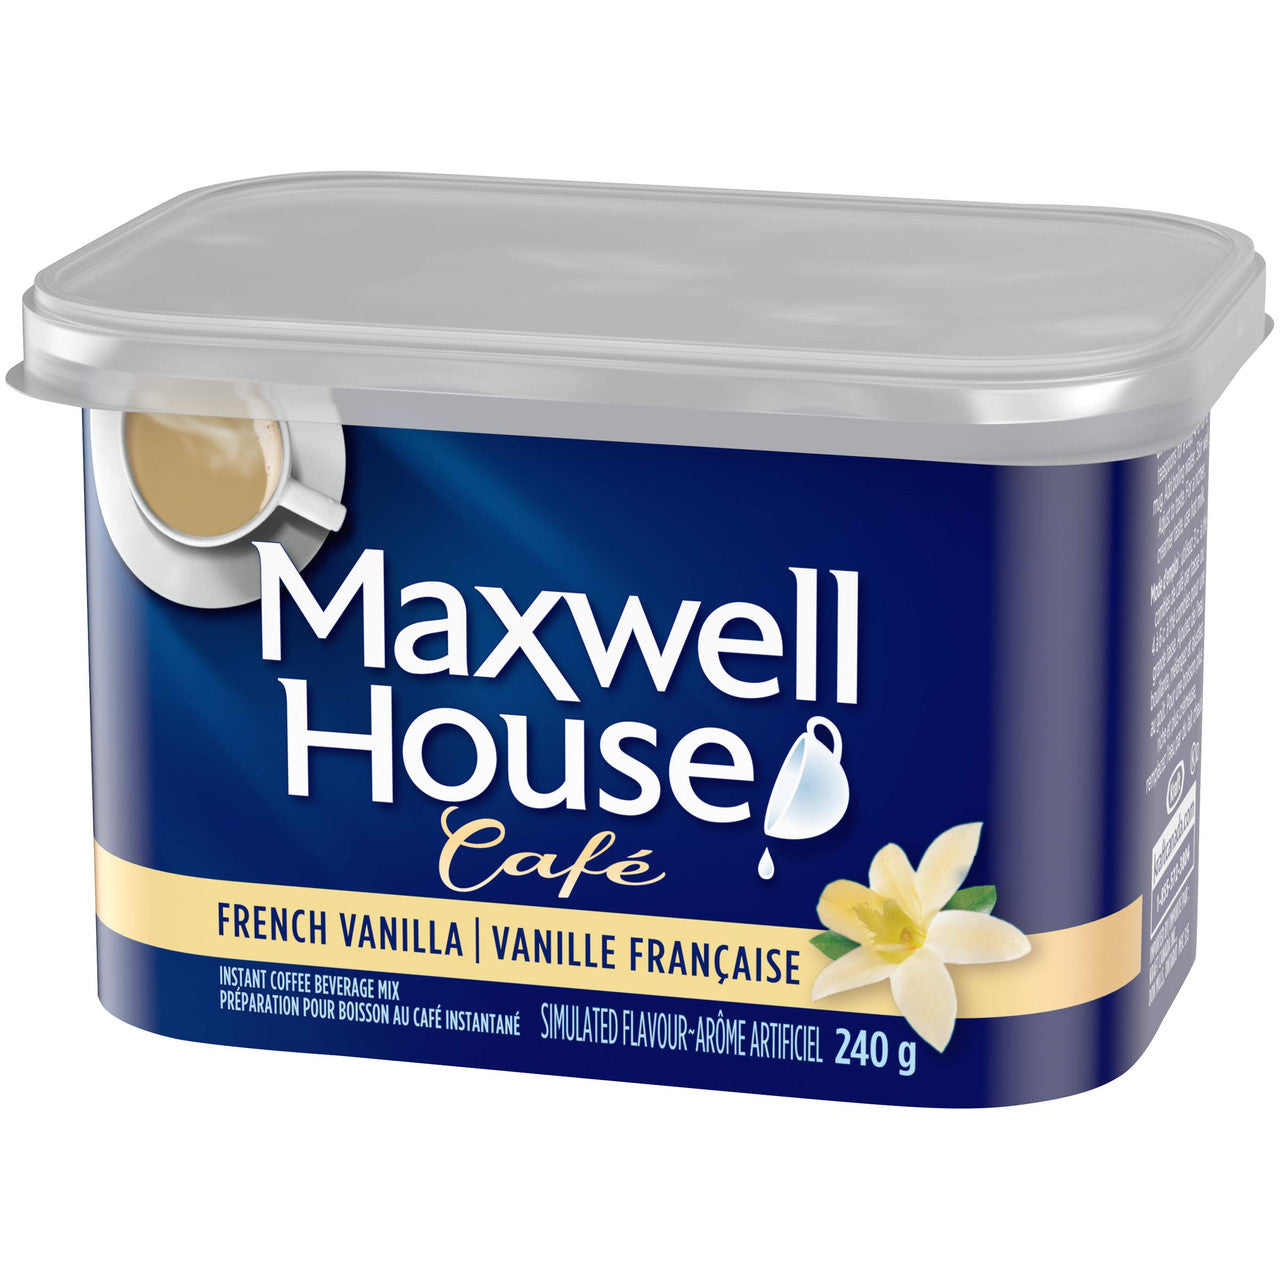 Maxwell House Cafe, French Vanilla, Instant Coffee, 240g/8.5oz., {Imported from Canada}